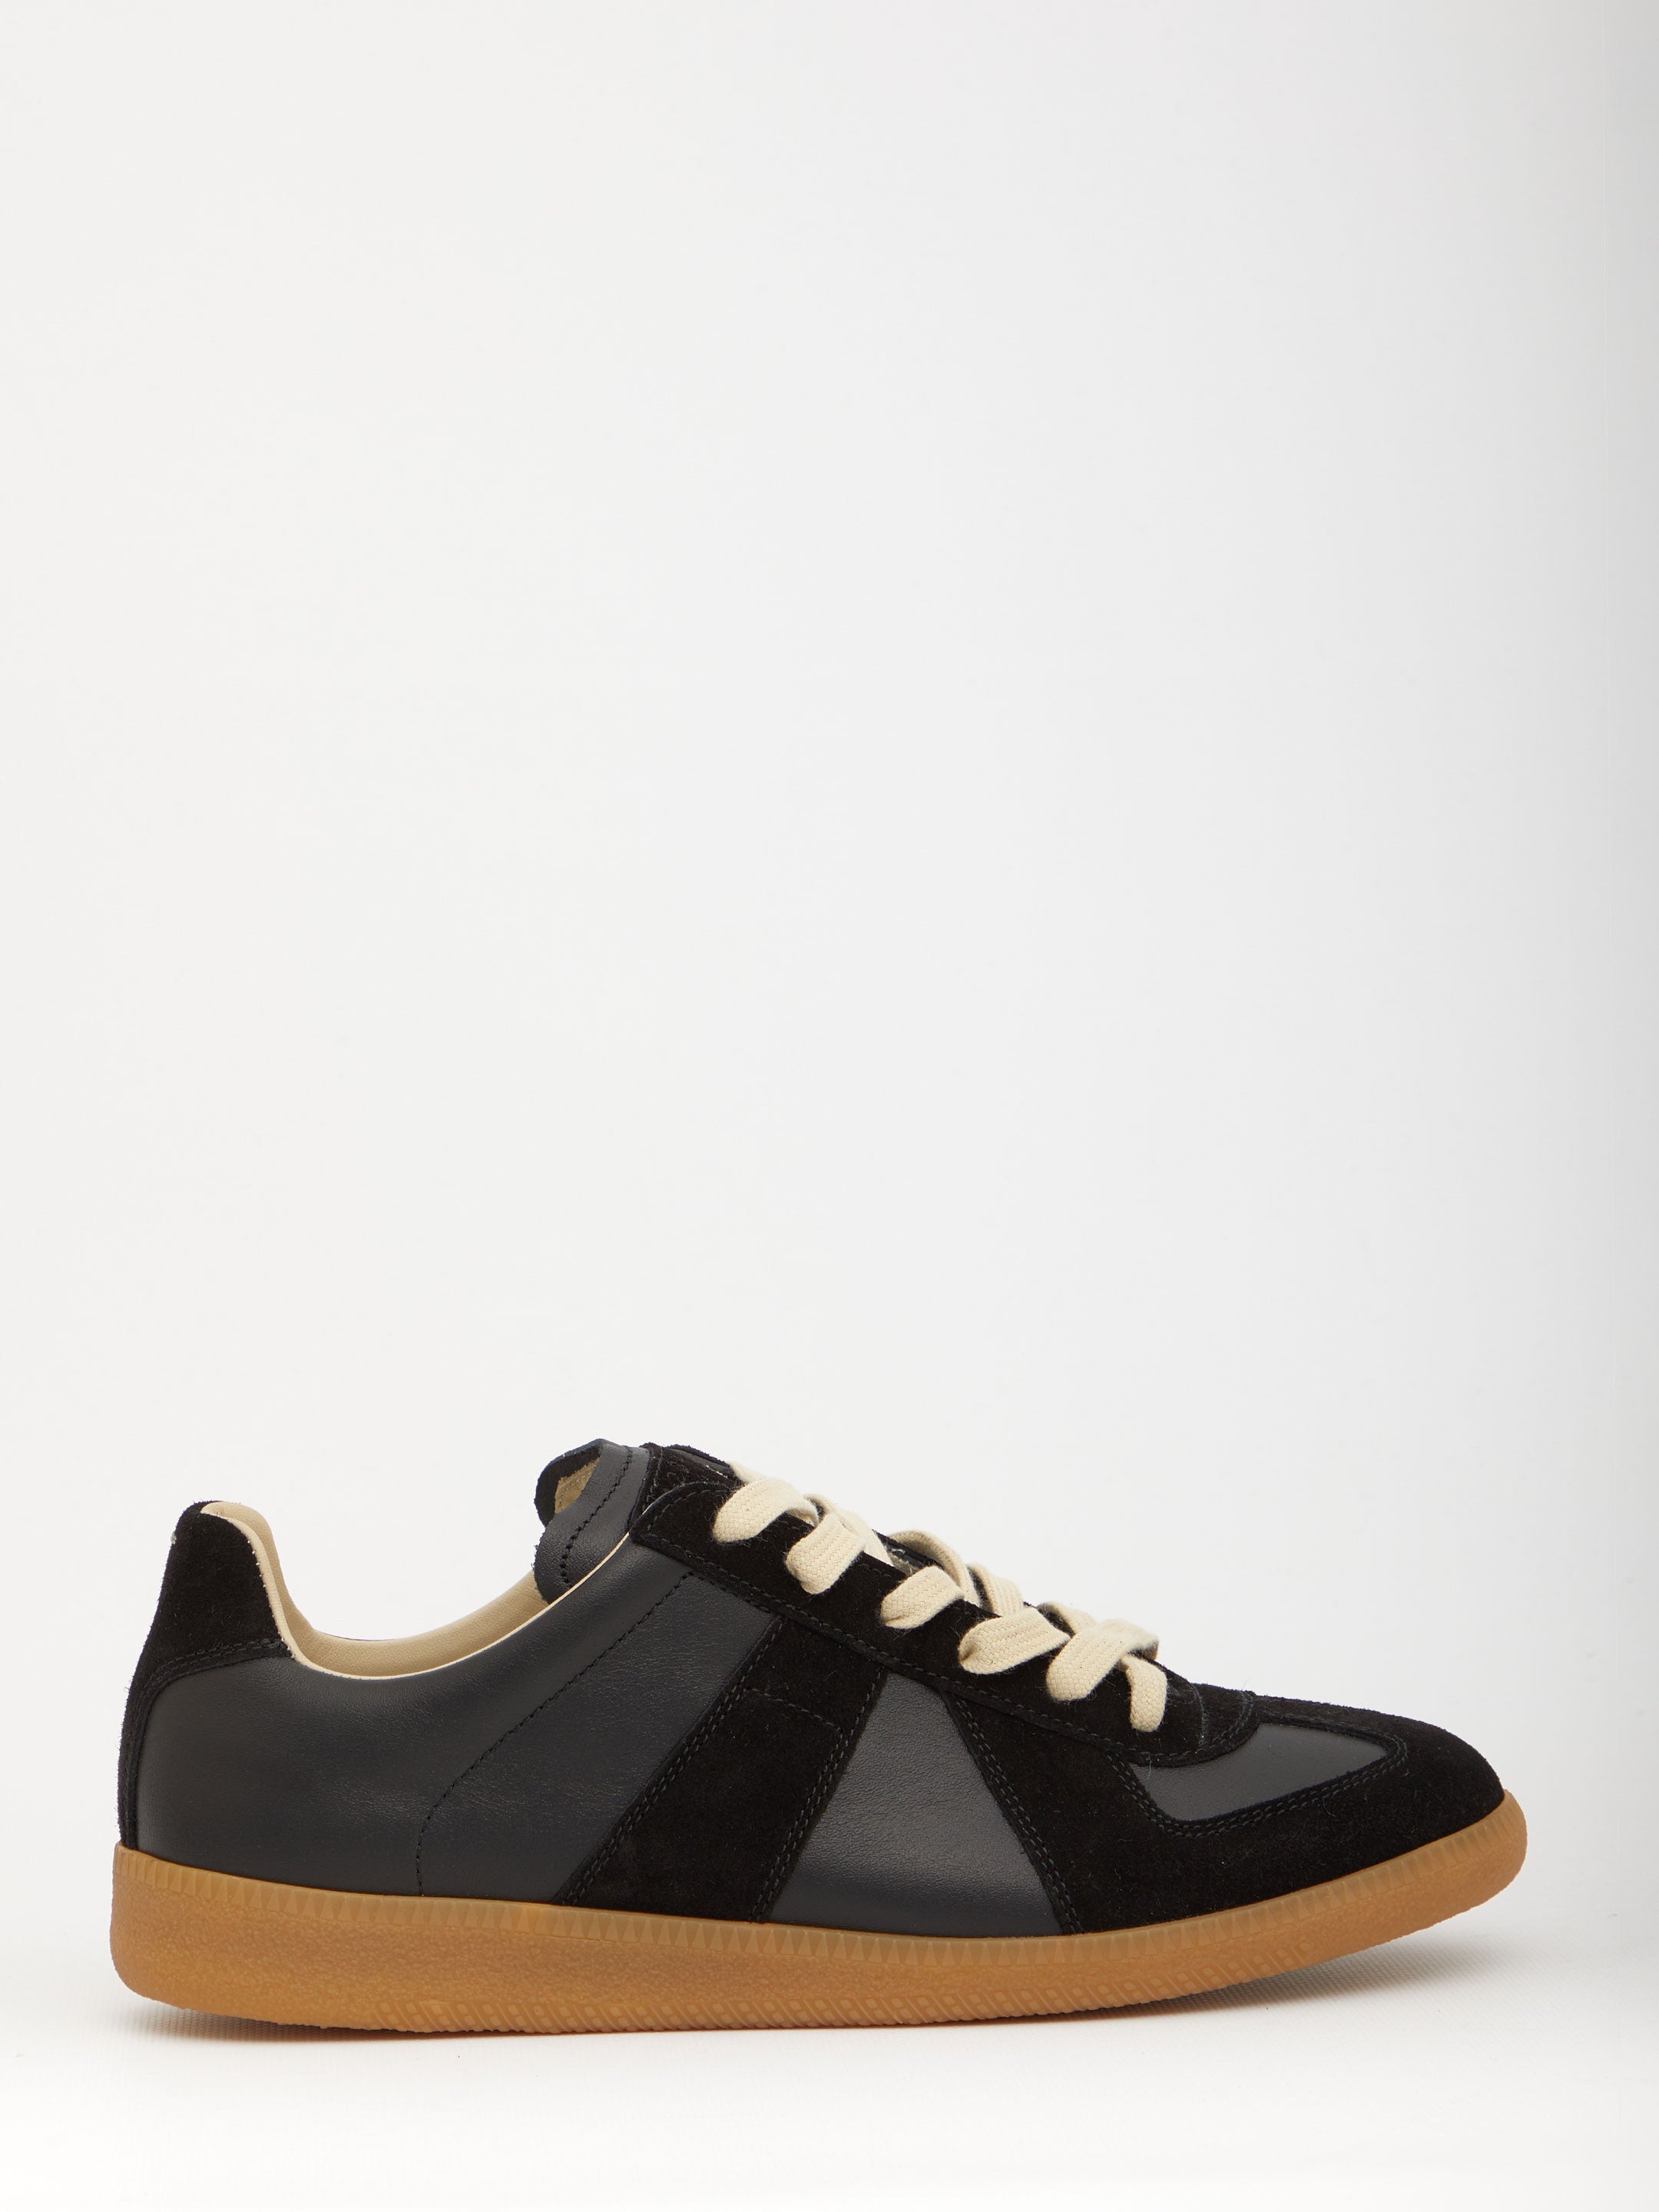 MAISON-MARGIELA-OUTLET-SALE-Replica-sneakers-Sneakers-40-BLACK-ARCHIVE-COLLECTION.jpg